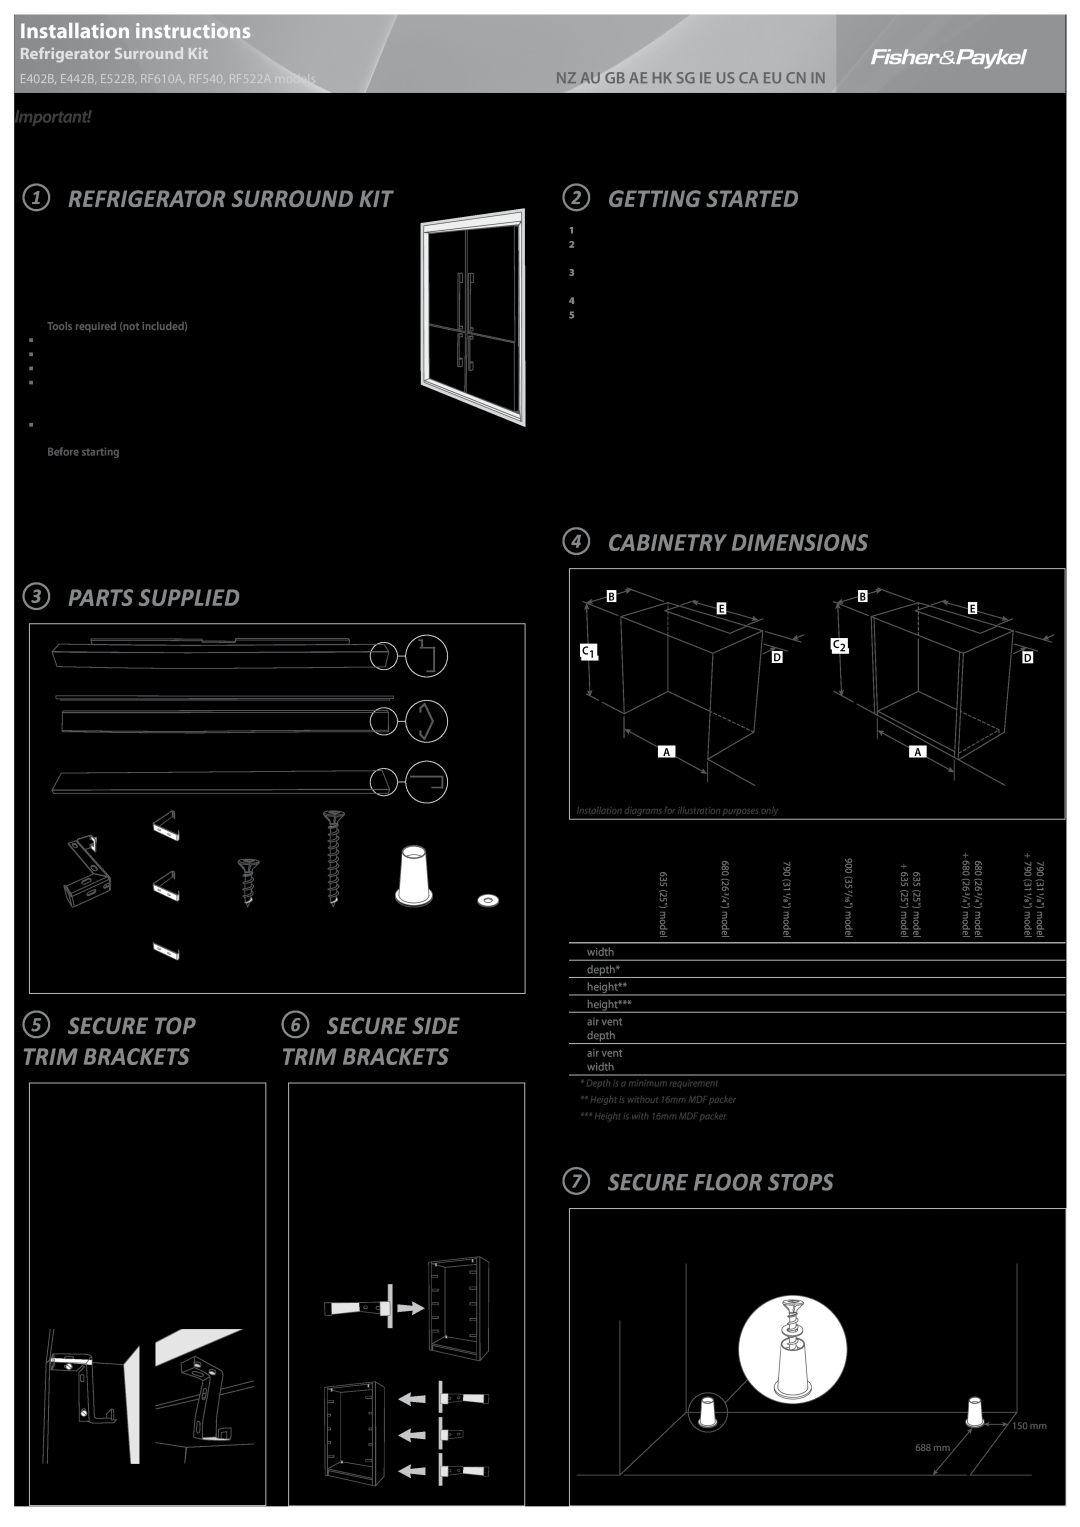 Fisher & Paykel RF540 installation instructions 1Refrigerator Surround Kit, 3Parts supplied, 2Getting Started, Diagram 